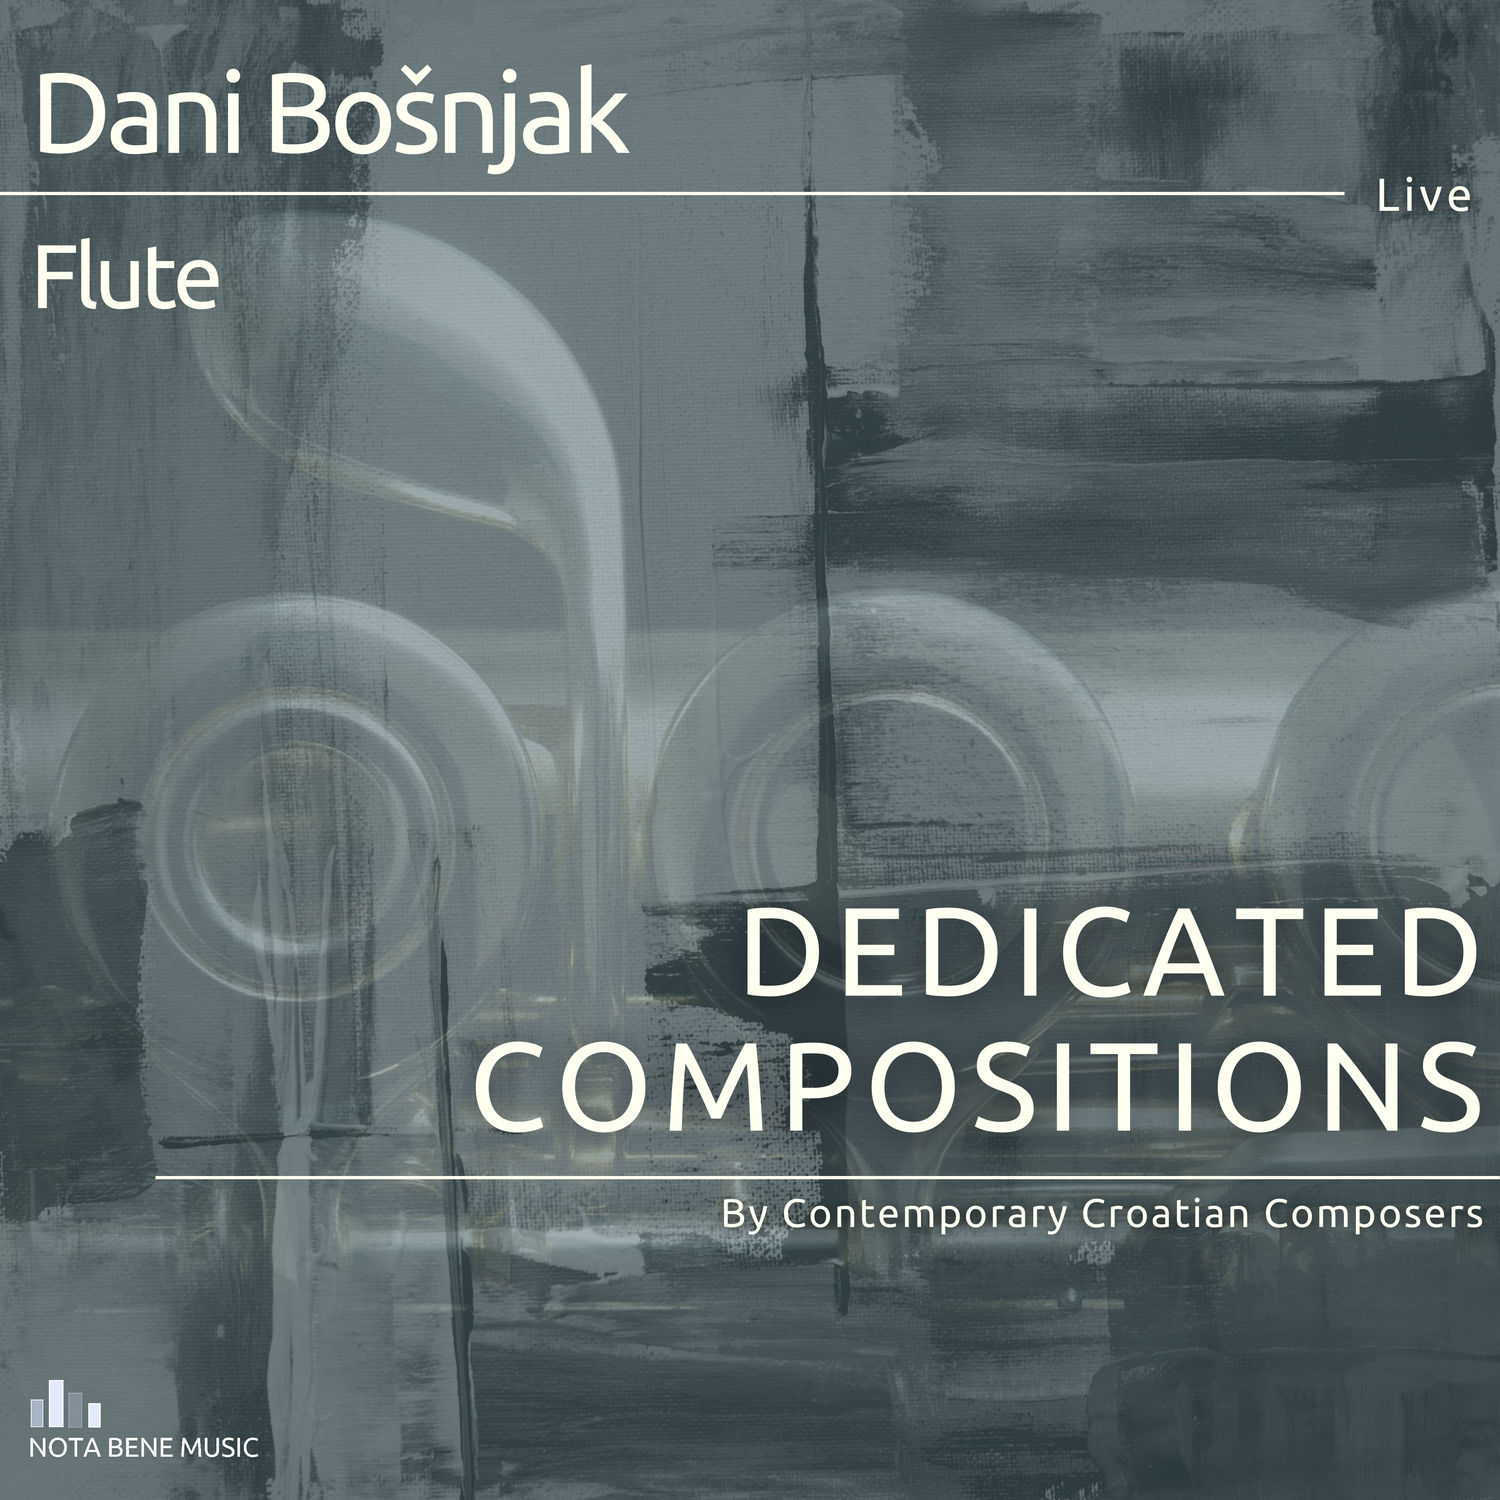 Dani Bosnjak – Dedicated Compositions By Contemporary Croatian Composers (Live) (2020) [FLAC 24bit/96kHz]